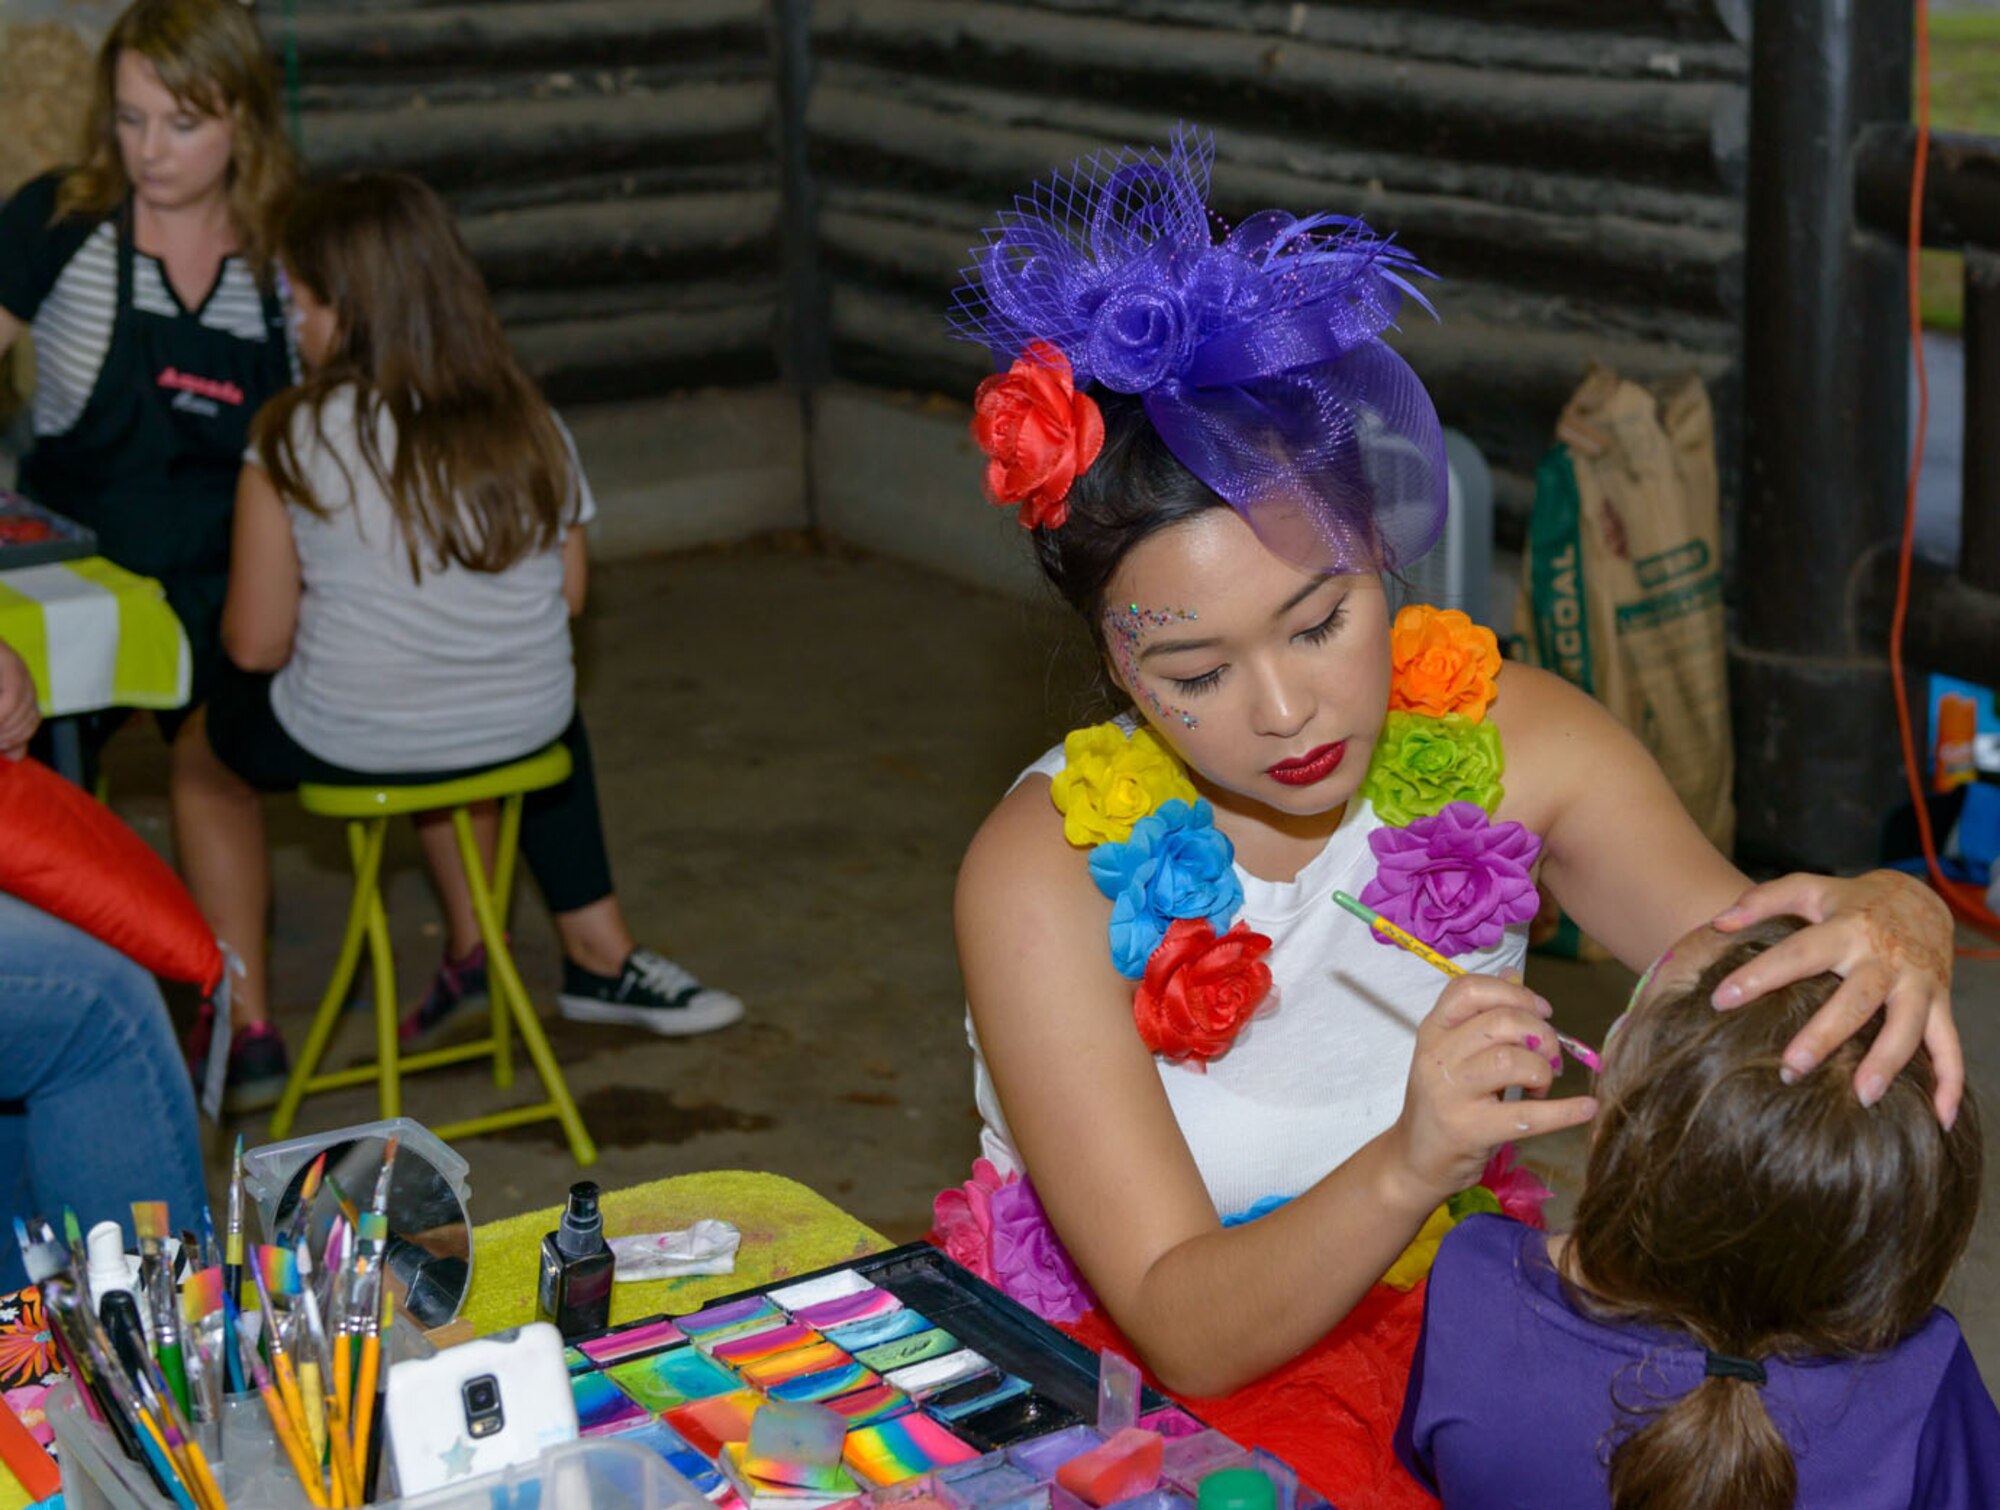 Catherine Ha, Copycats Face Painting owner, applies face paint to Keesler families during Freedom Fest at Marina Park on Keesler Air Force Base, Mississippi, June 30, 2018. The event included carnival rides, a burger cook-off, hot wings and watermelon eating competitions and a fireworks display. (U.S. Air Force photo by Andre’ Askew)